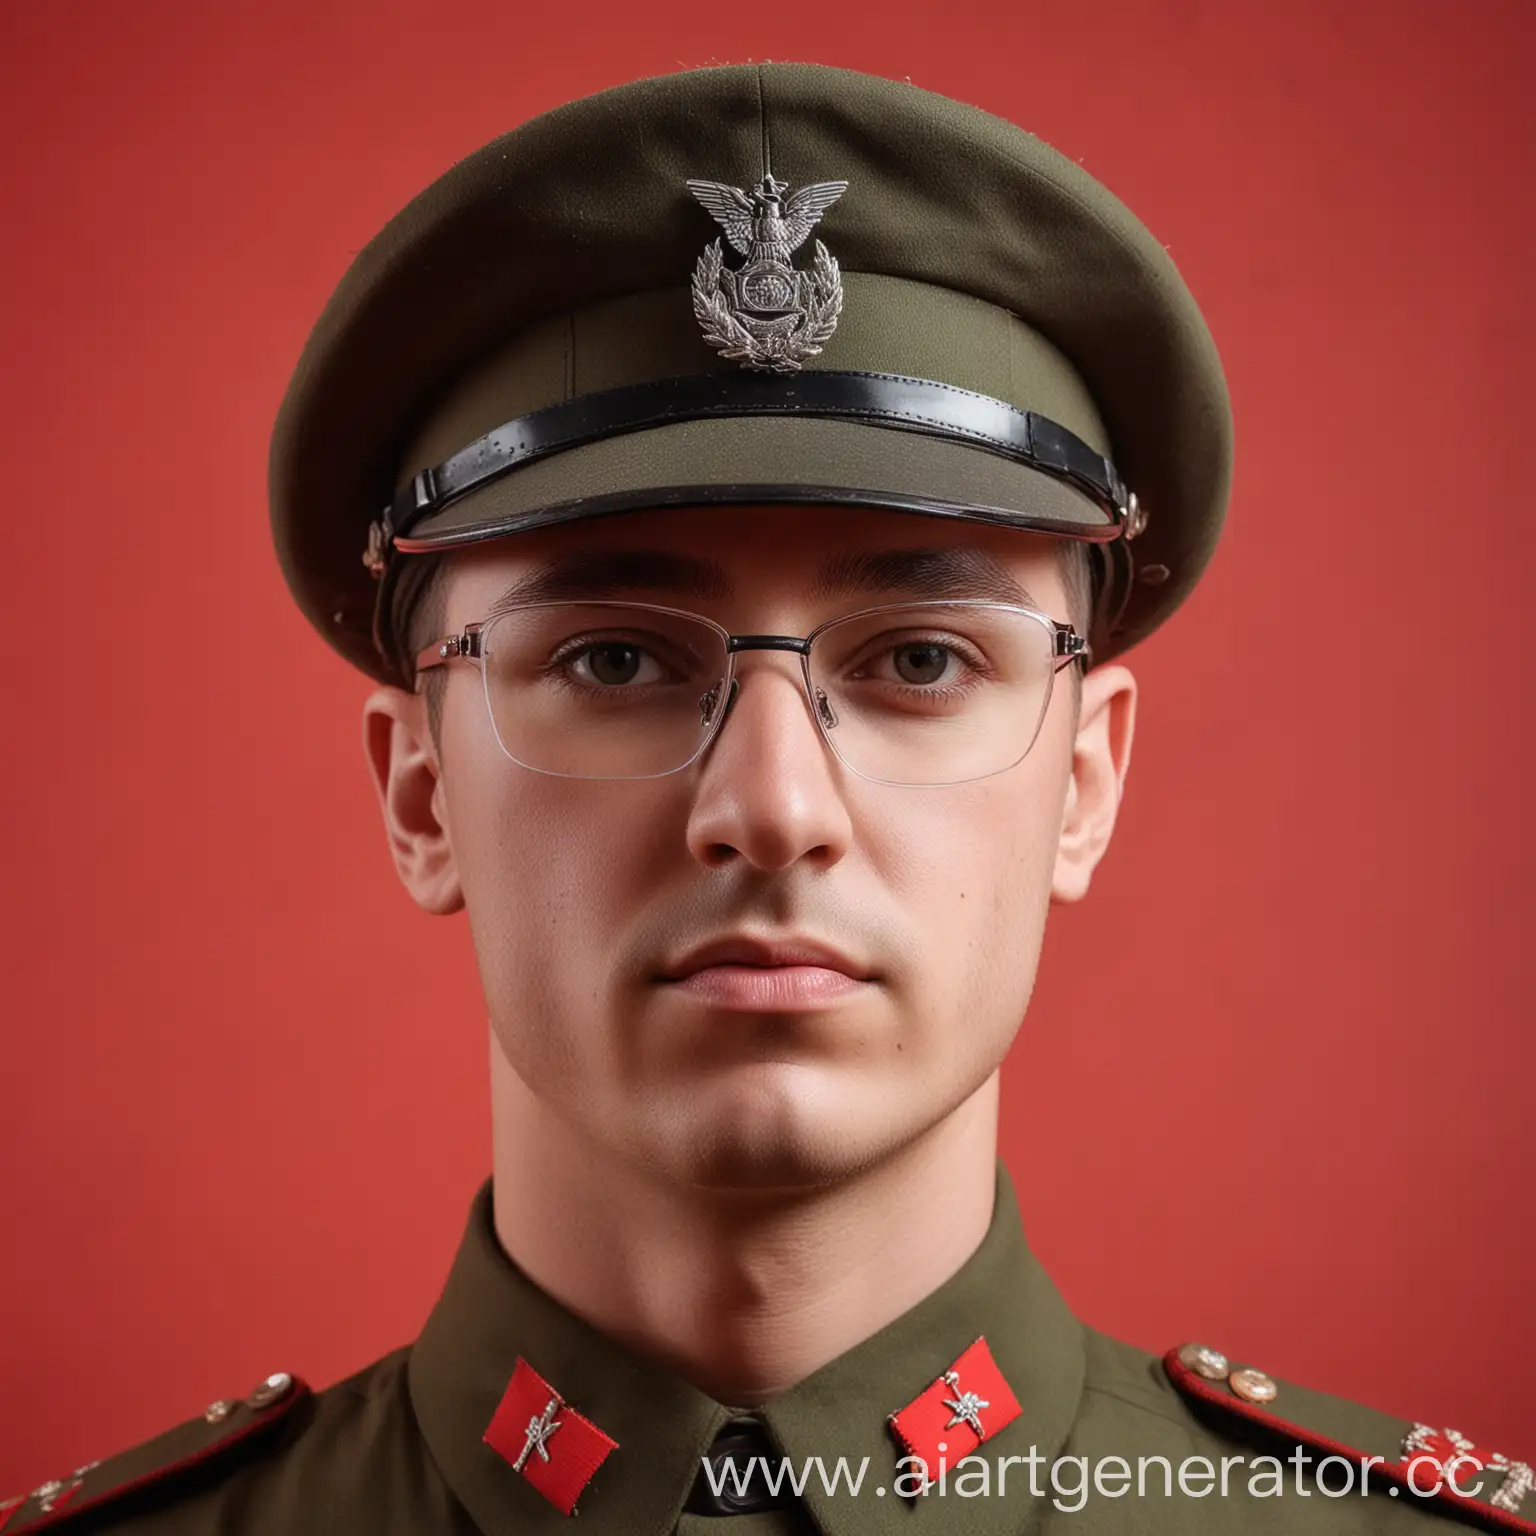 A soldier in glasses against a red background, on Victory Day